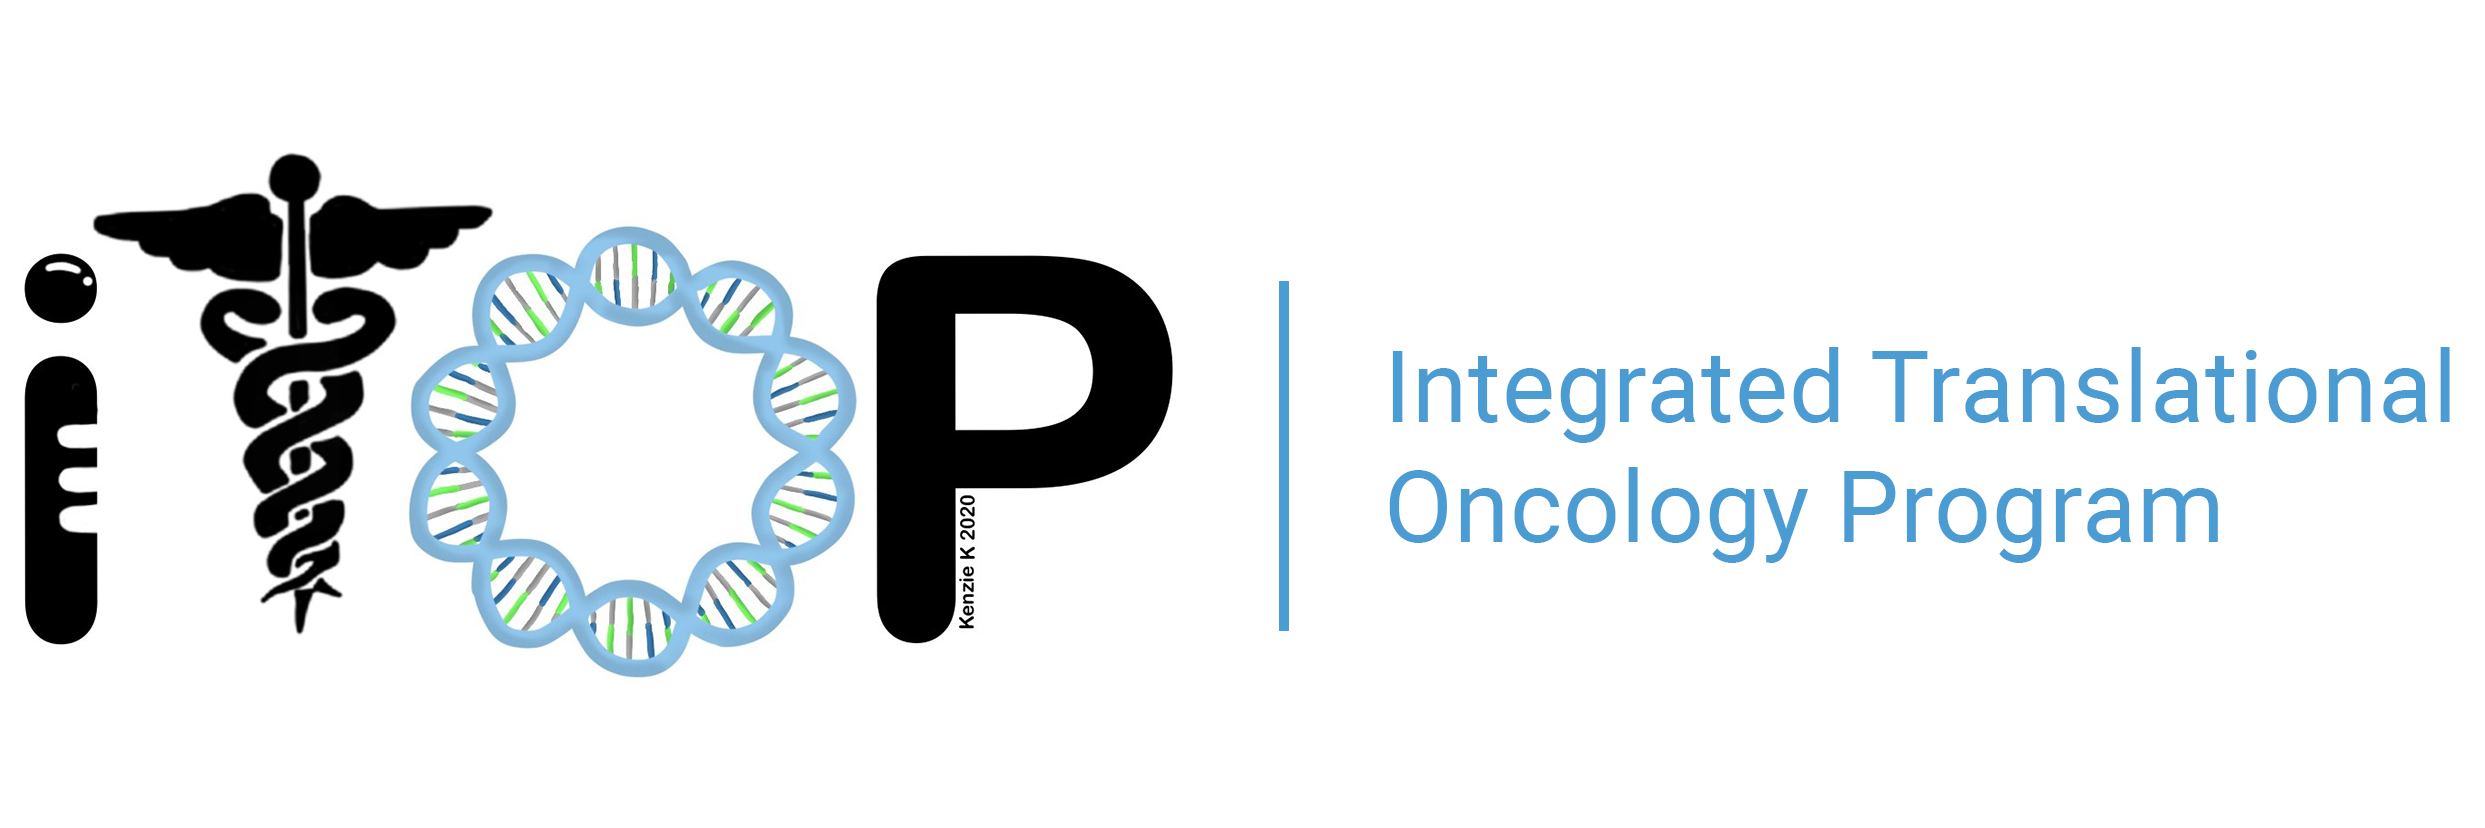 Integrated Translational Oncology Program (iTOP)